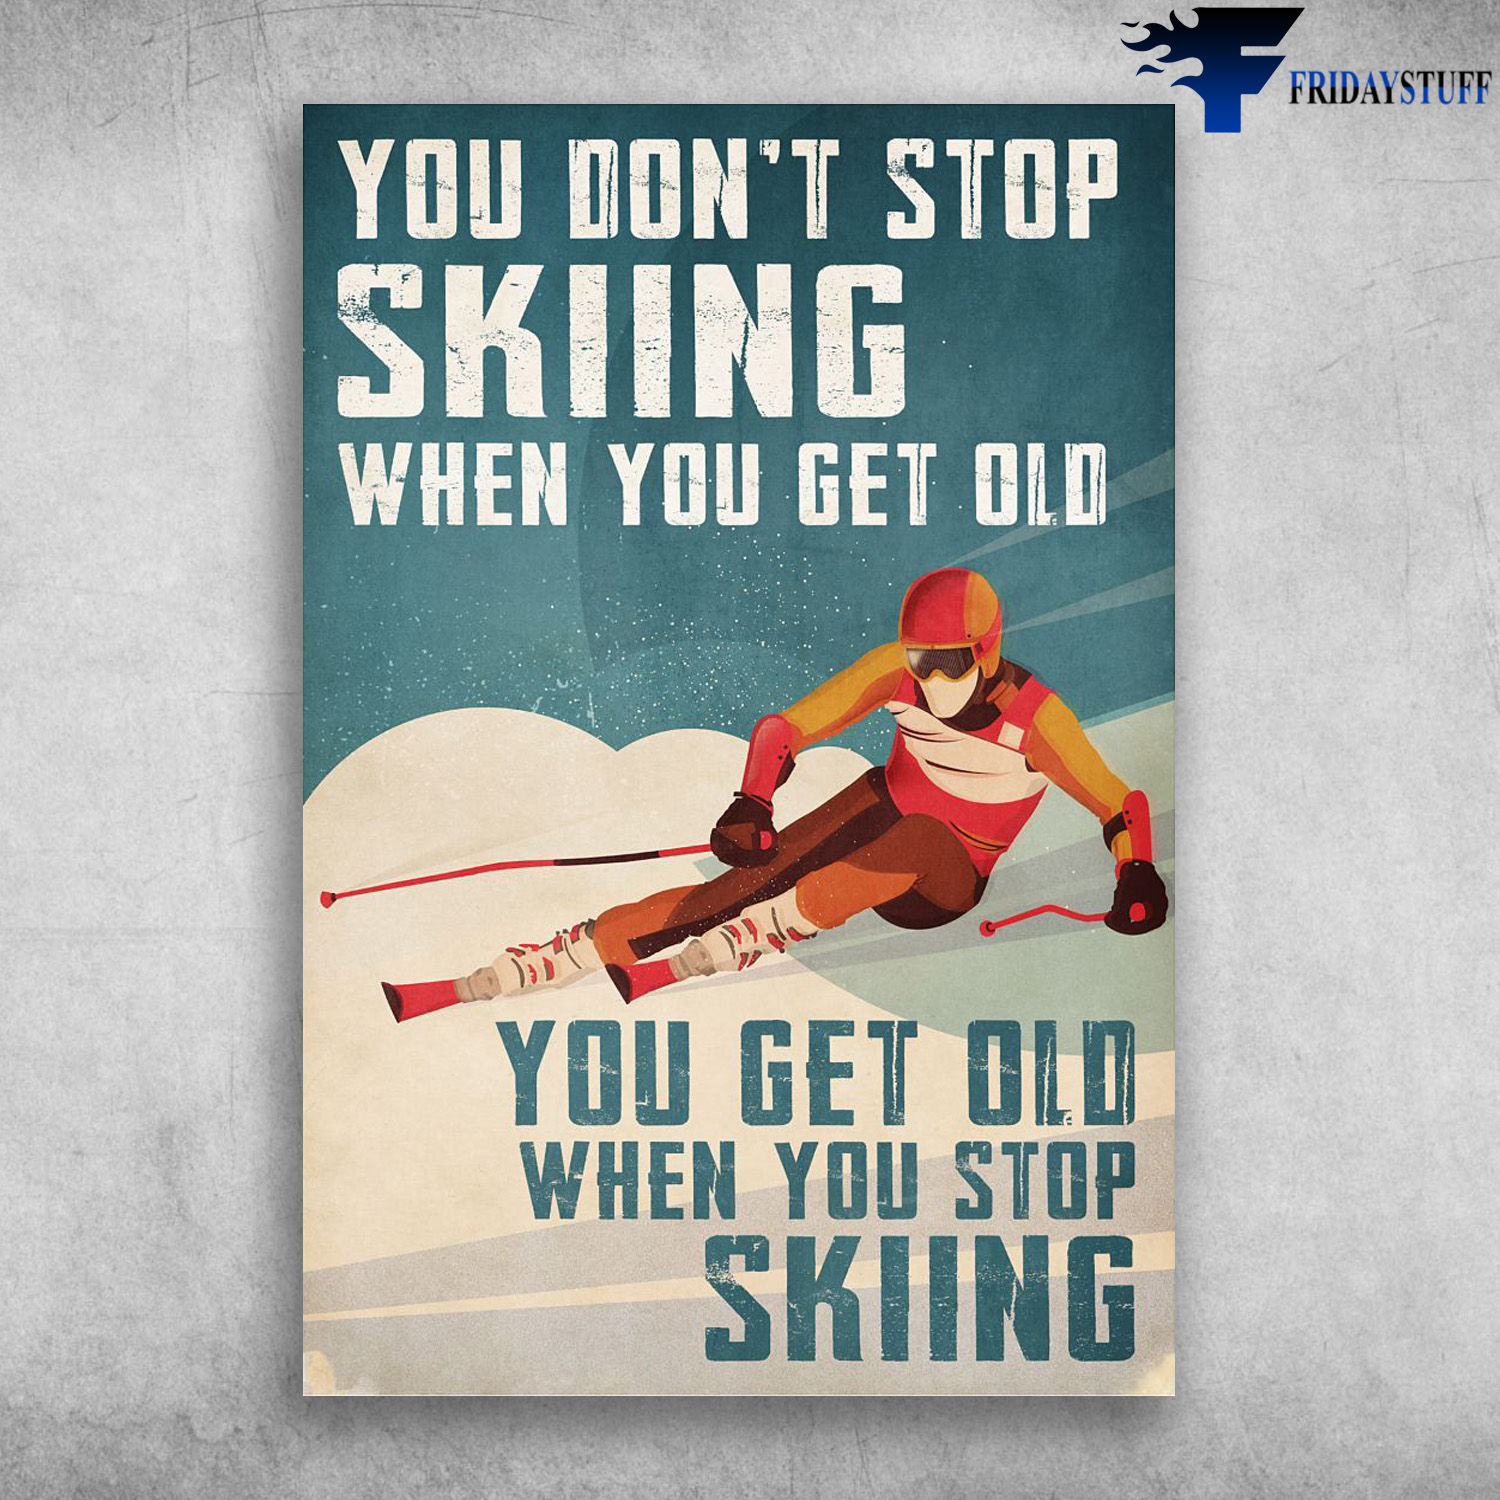 Man Skiing - You Don't Stop Skiing When You Get Old, You Get Old When You When You Stop Skiing